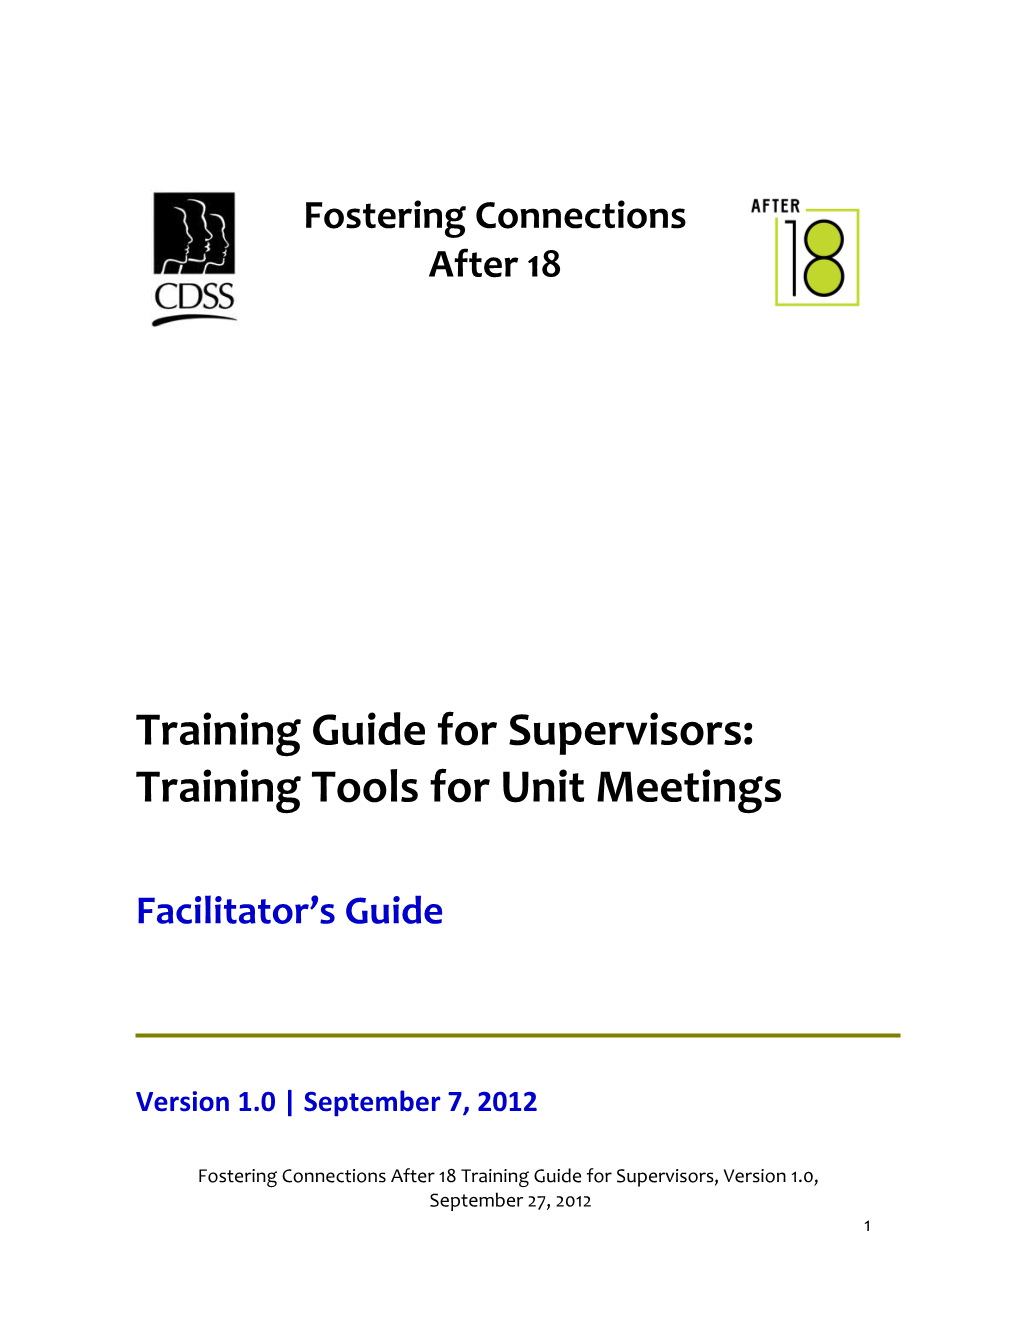 AB12 Implementation Guide for Supervisors s1